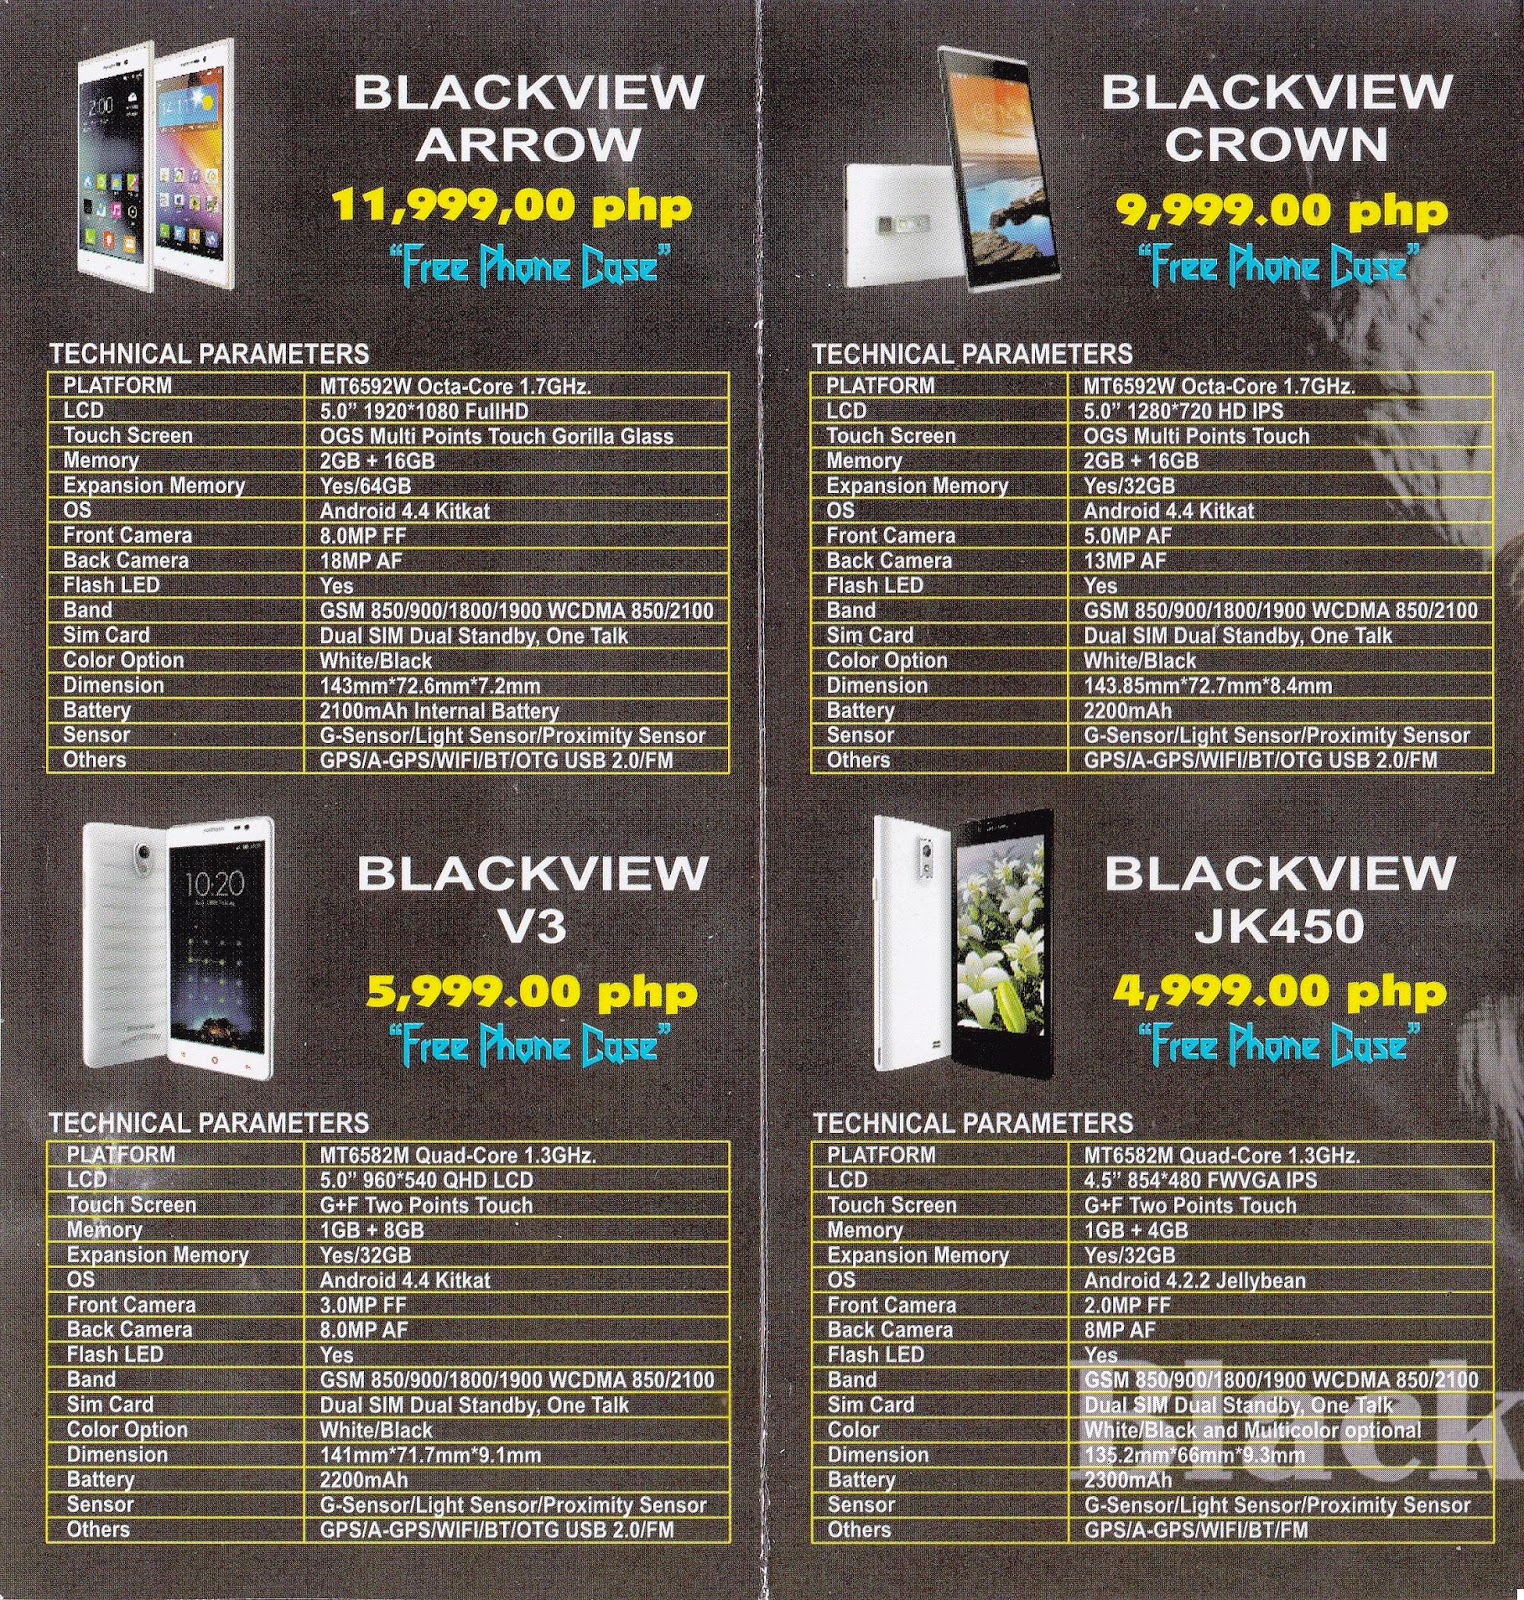 Blackview Android Smartphones Now in the Philippines